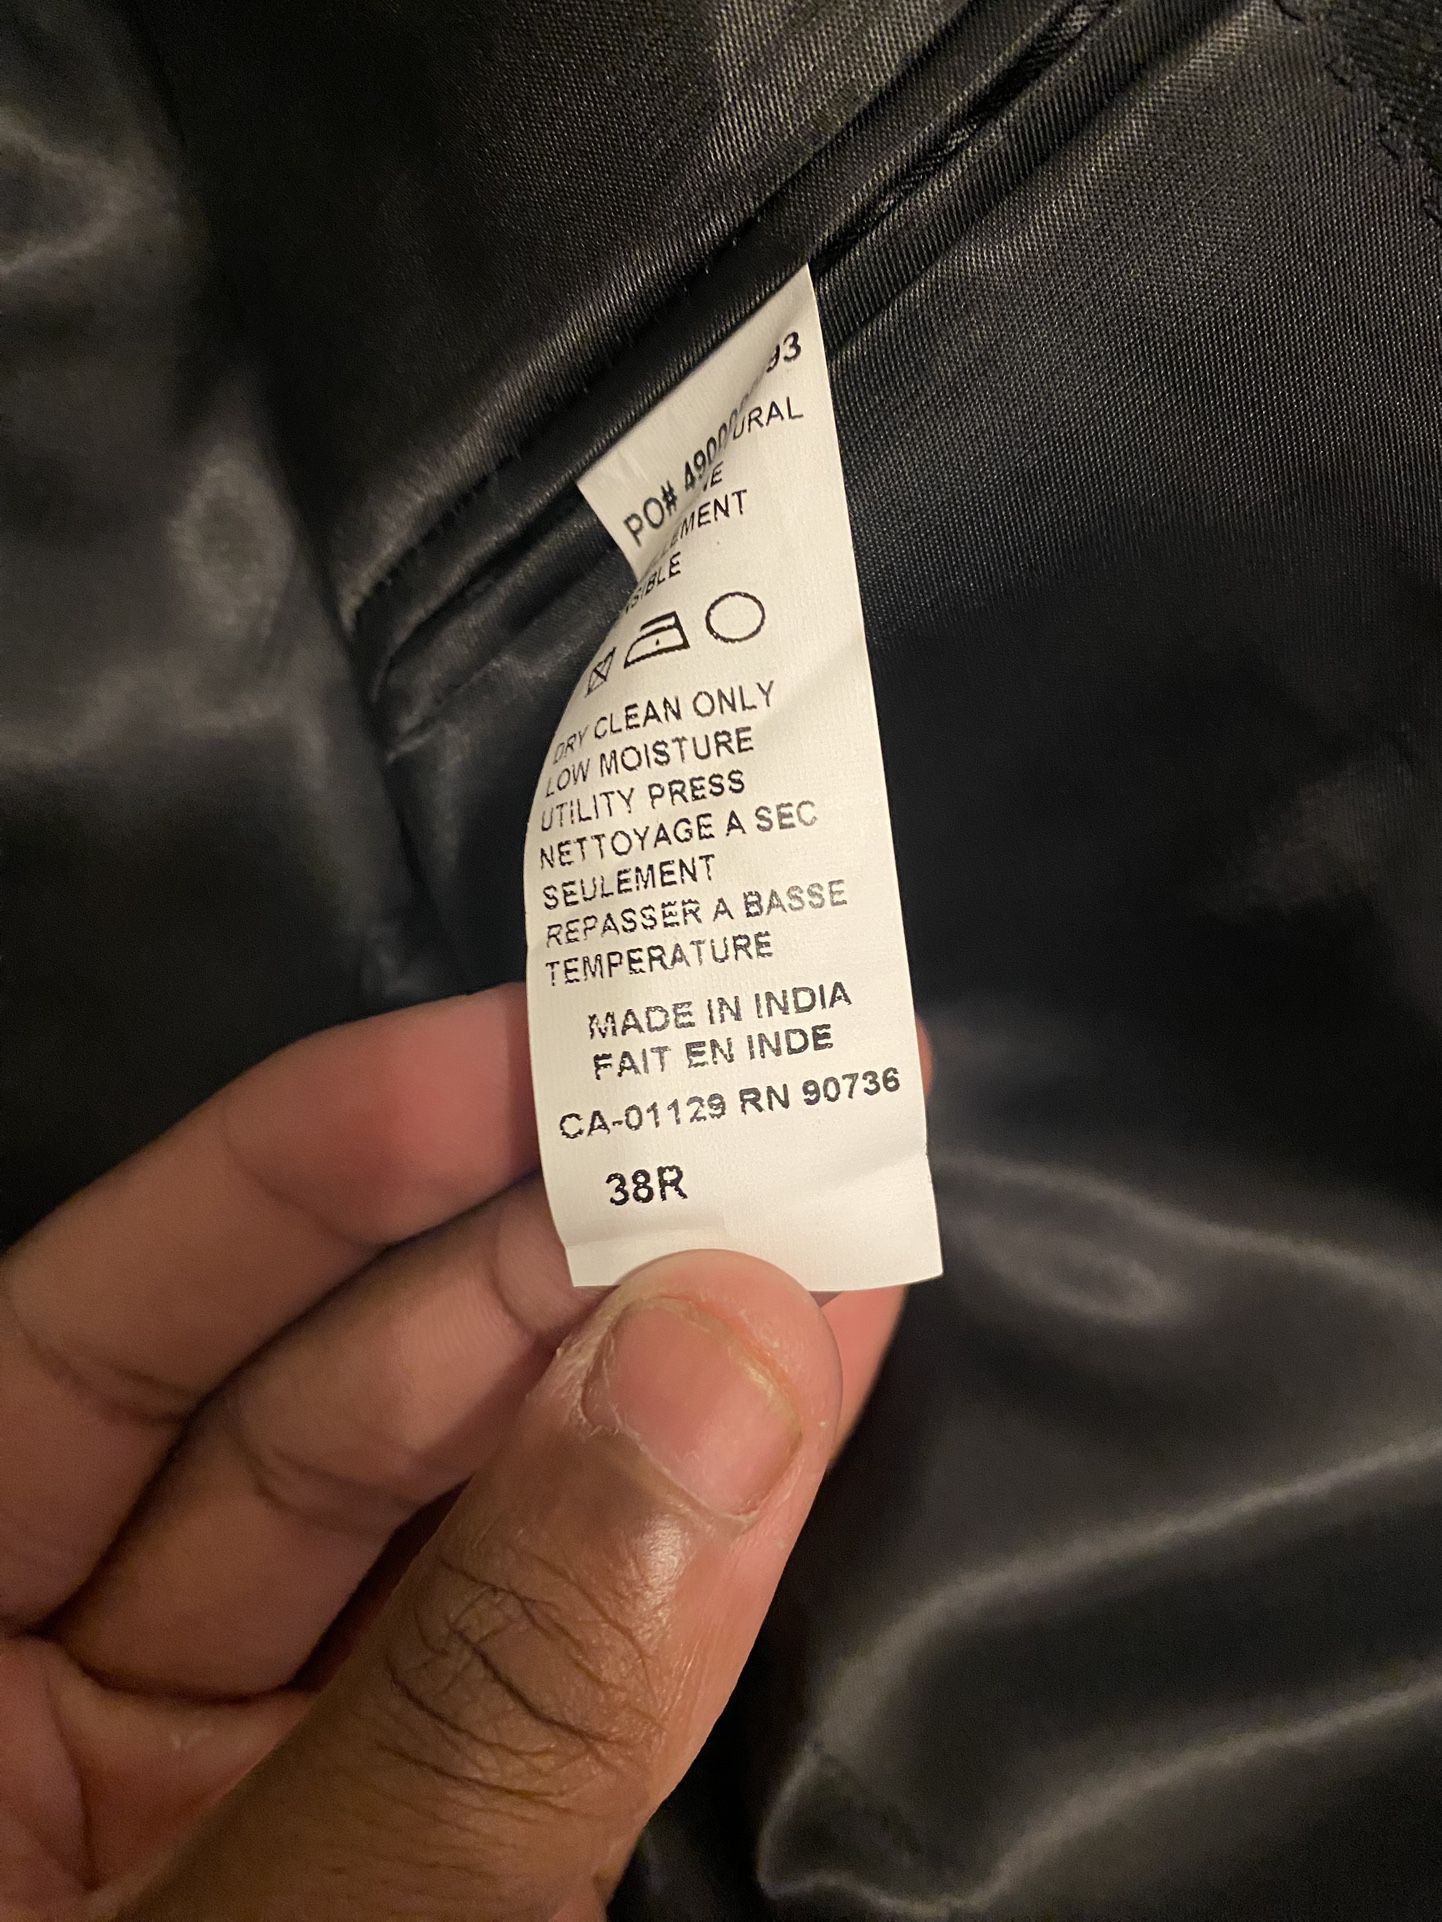 Calvin Klein prom suit for Sale in Philadelphia, PA - OfferUp